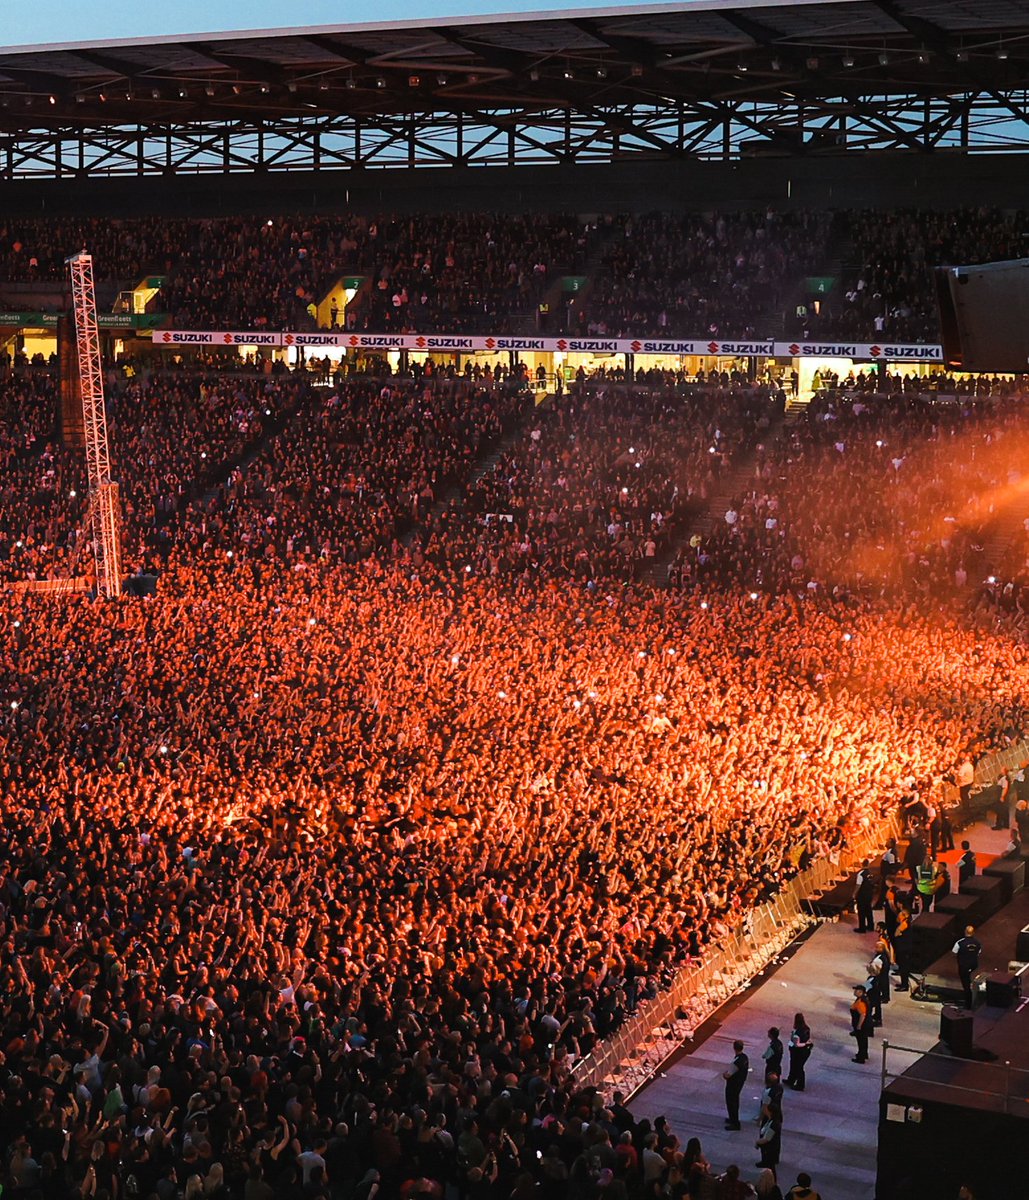 What a sight!😍 Throwback to 2 years ago today when @MCRofficial rocked Stadium MK!🤘